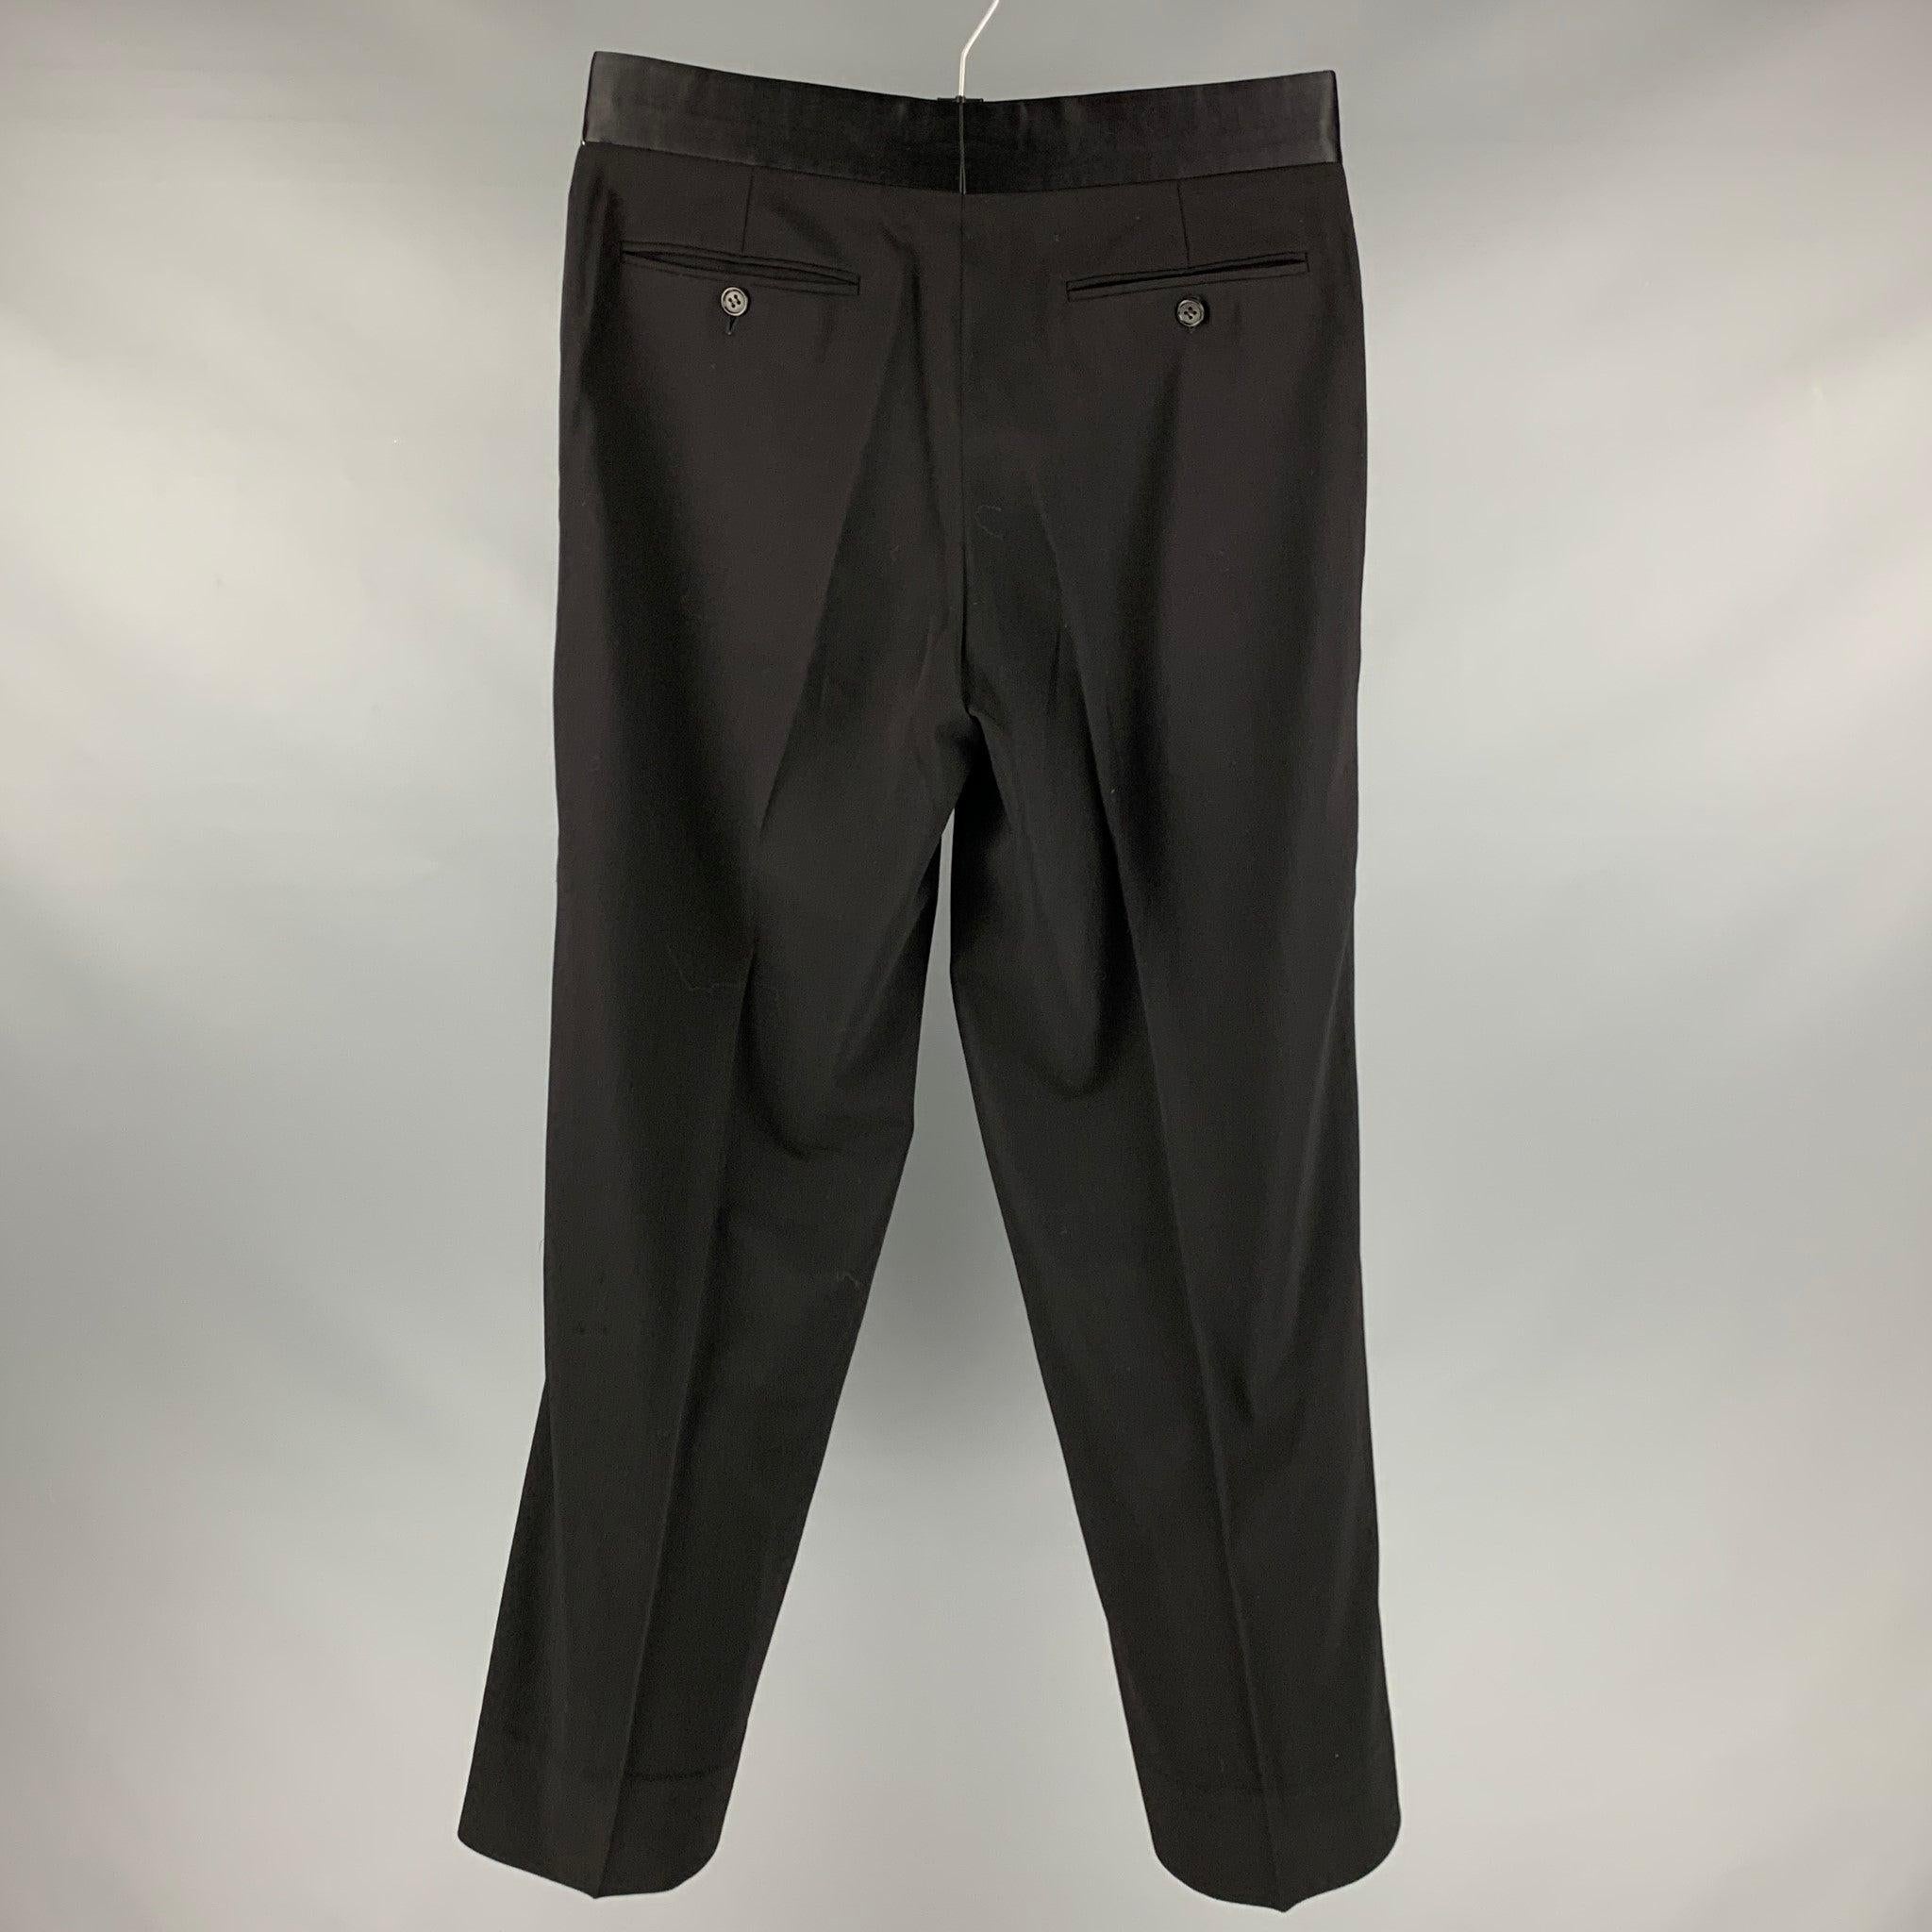 GIORGIO ARMANI tuxedo dress pants in a black wool fabric featuring a regular fit, tuxedo stripe, and zipper fly closure. Made in Italy.Excellent Pre-Owned Condition. 

Marked:  IT 50 

Measurements: 
 Waist: 32 inches Rise: 9.5 inches Inseam: 29